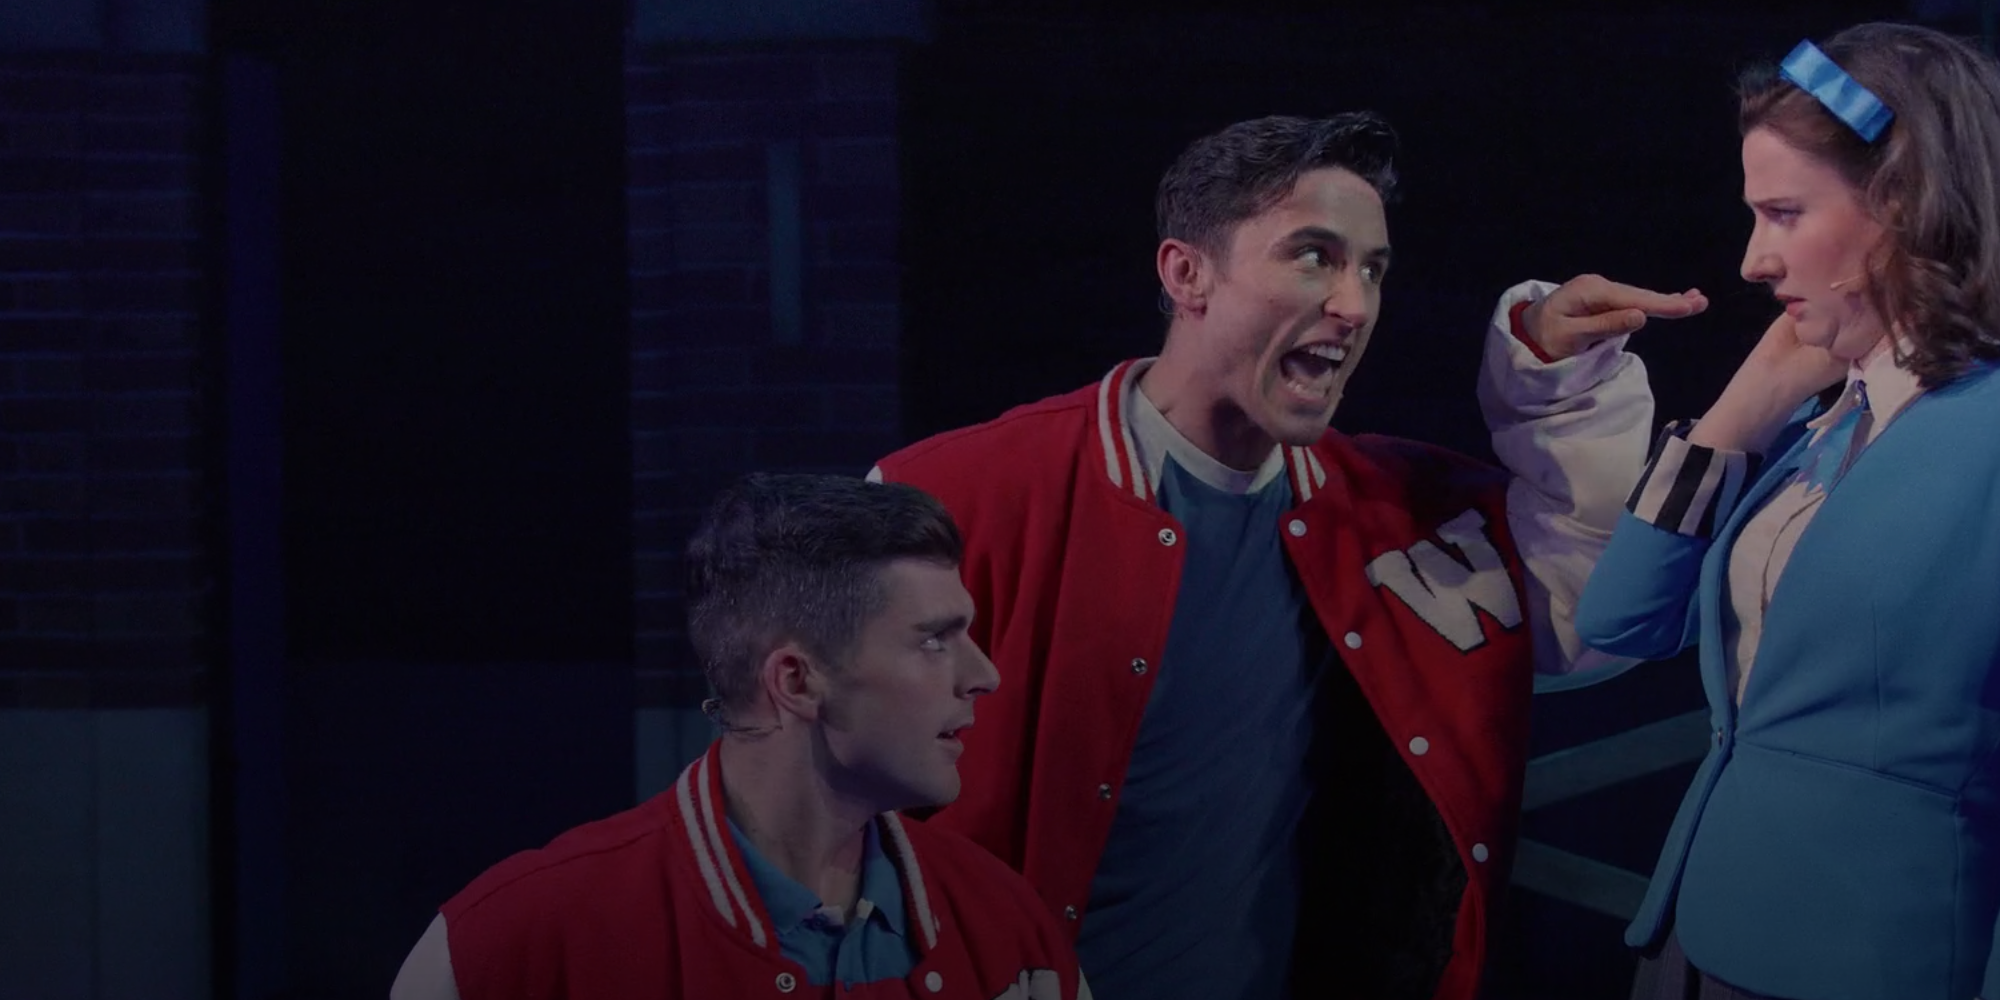 Ram Sweeney and Kurt Kelly aggressively propositioning Veronica in Heathers: The Musical